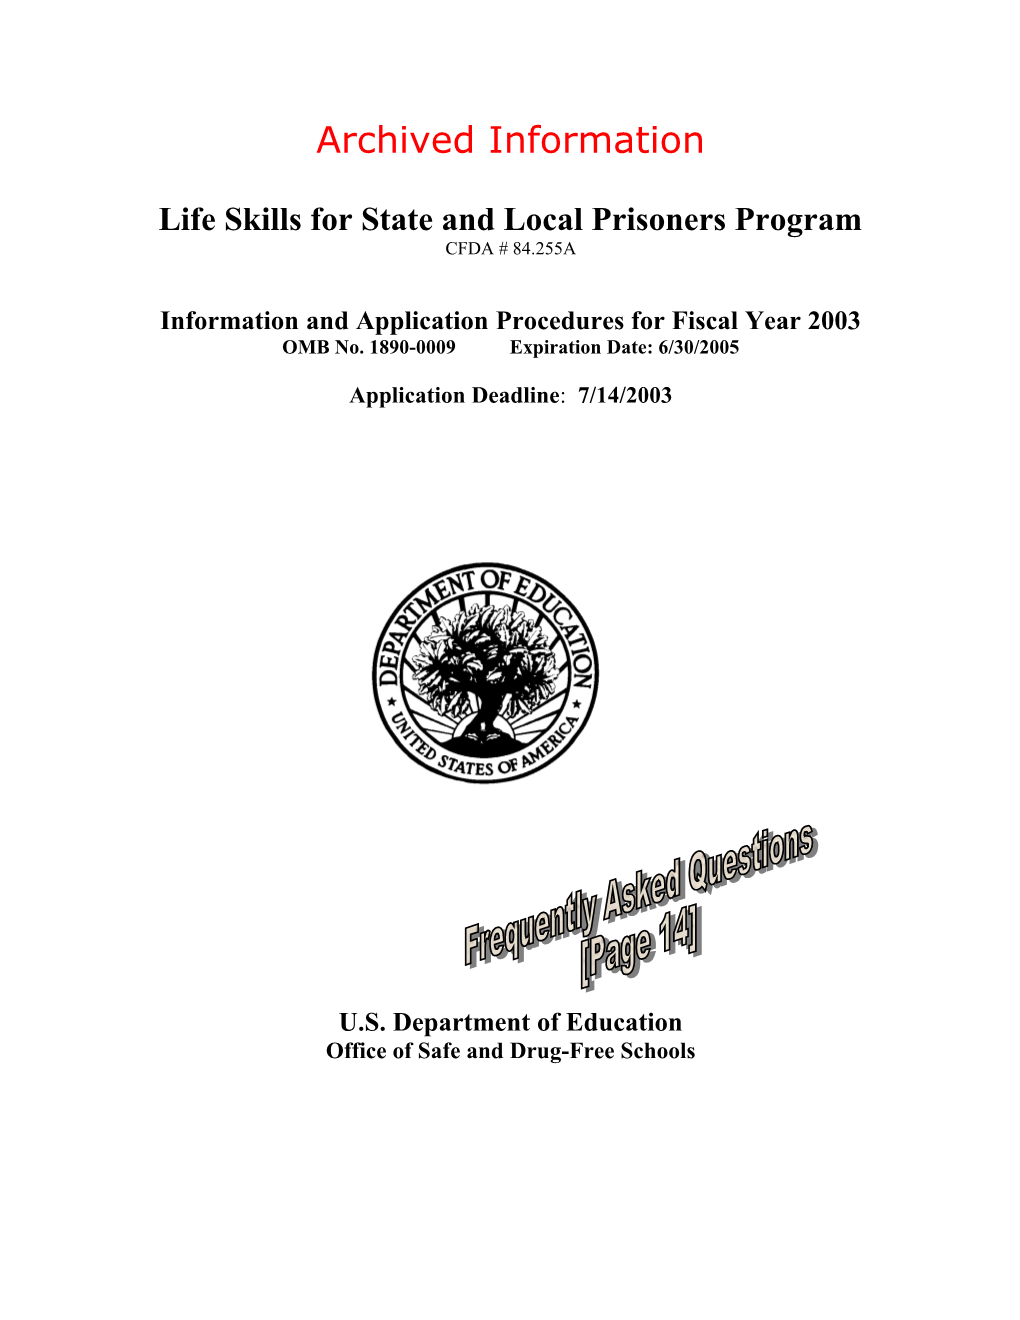 Archived: FY 2003 Application for the Life Skills for State and Local Prisoners Program